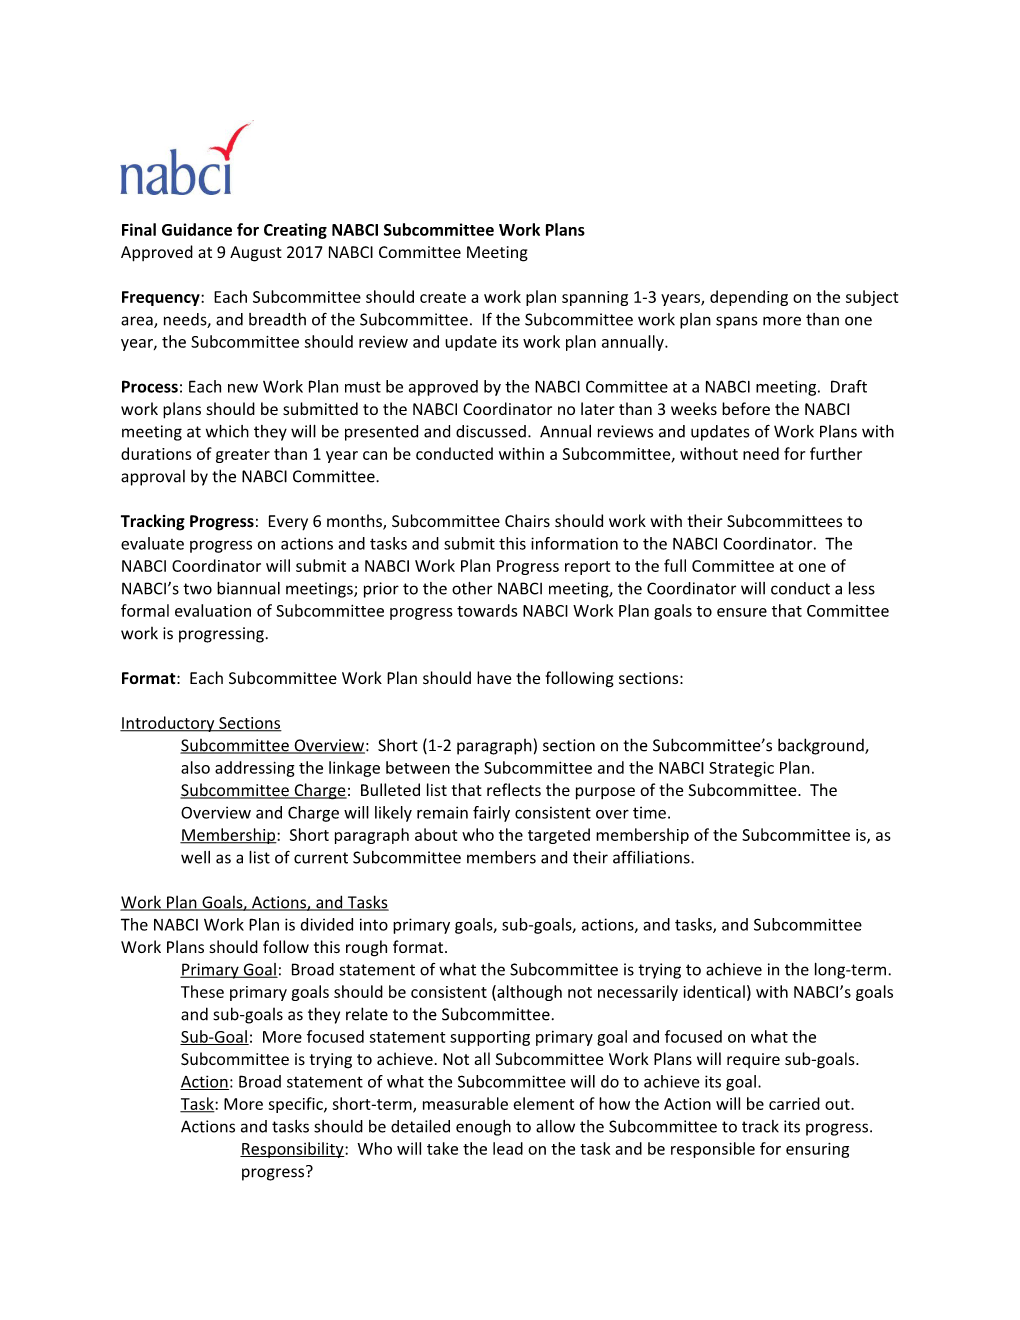 Final Guidance for Creating NABCI Subcommittee Work Plans